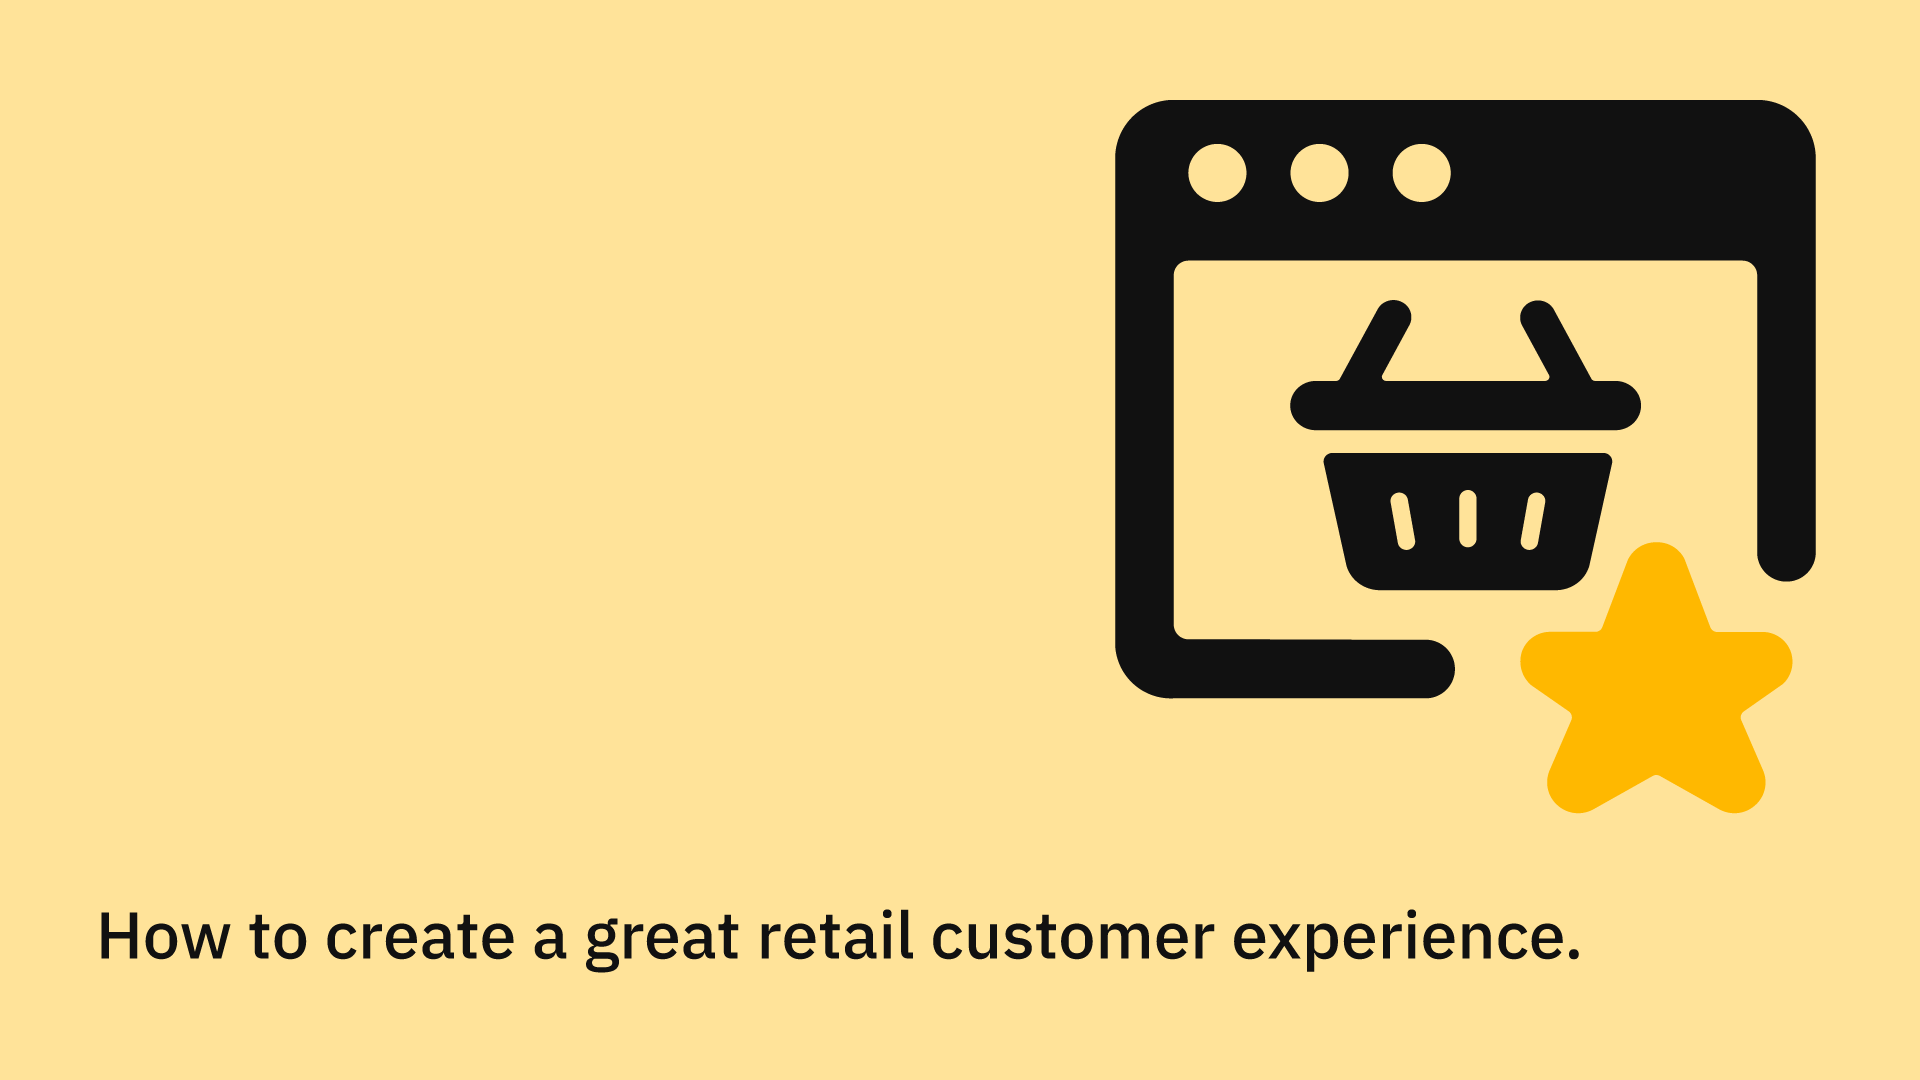 How to create a great online retail customer experience